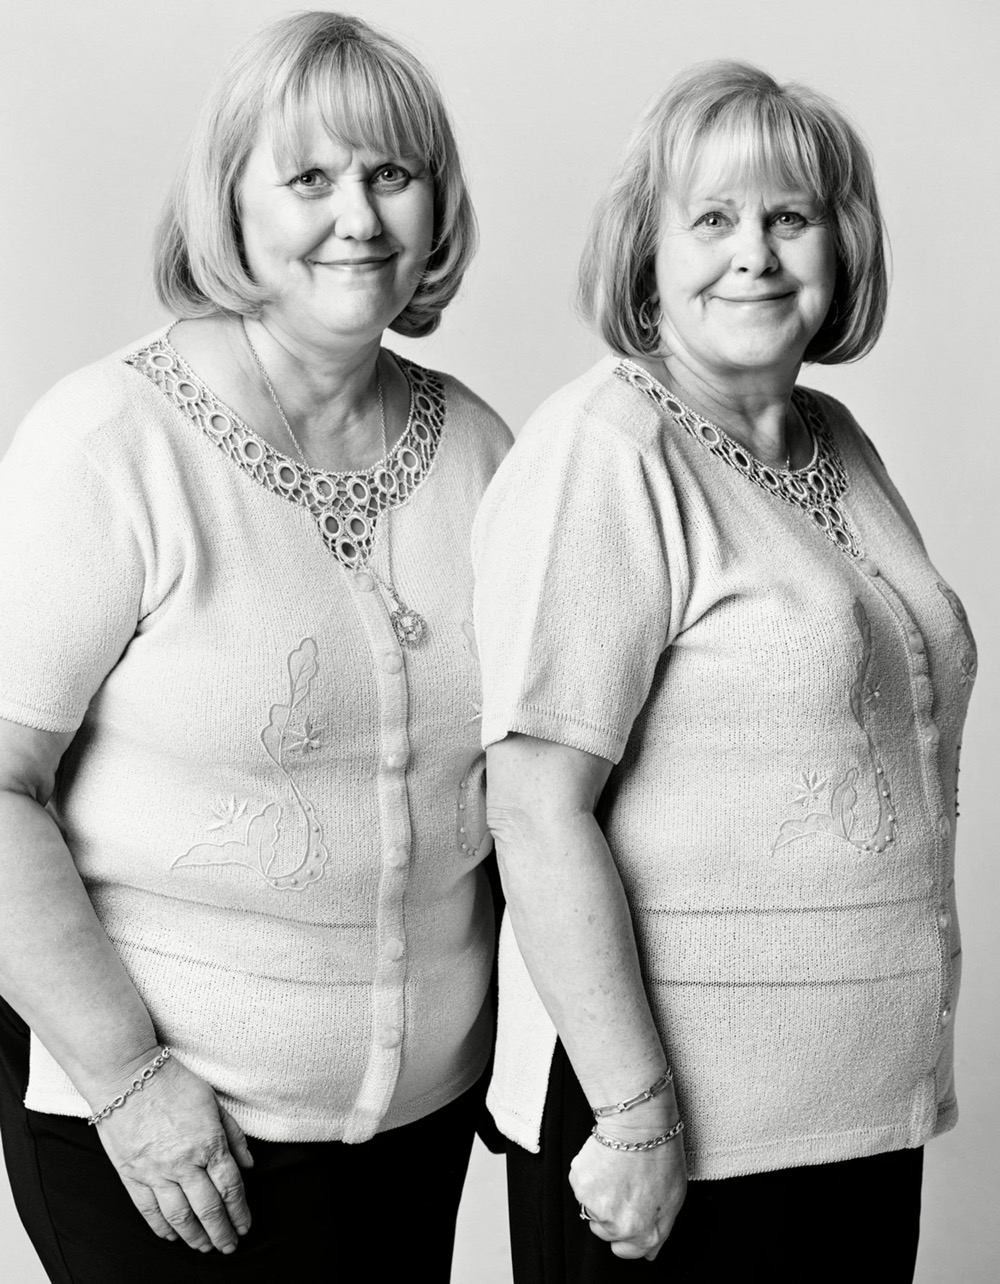 black & white photo of two unrelated people who look alike